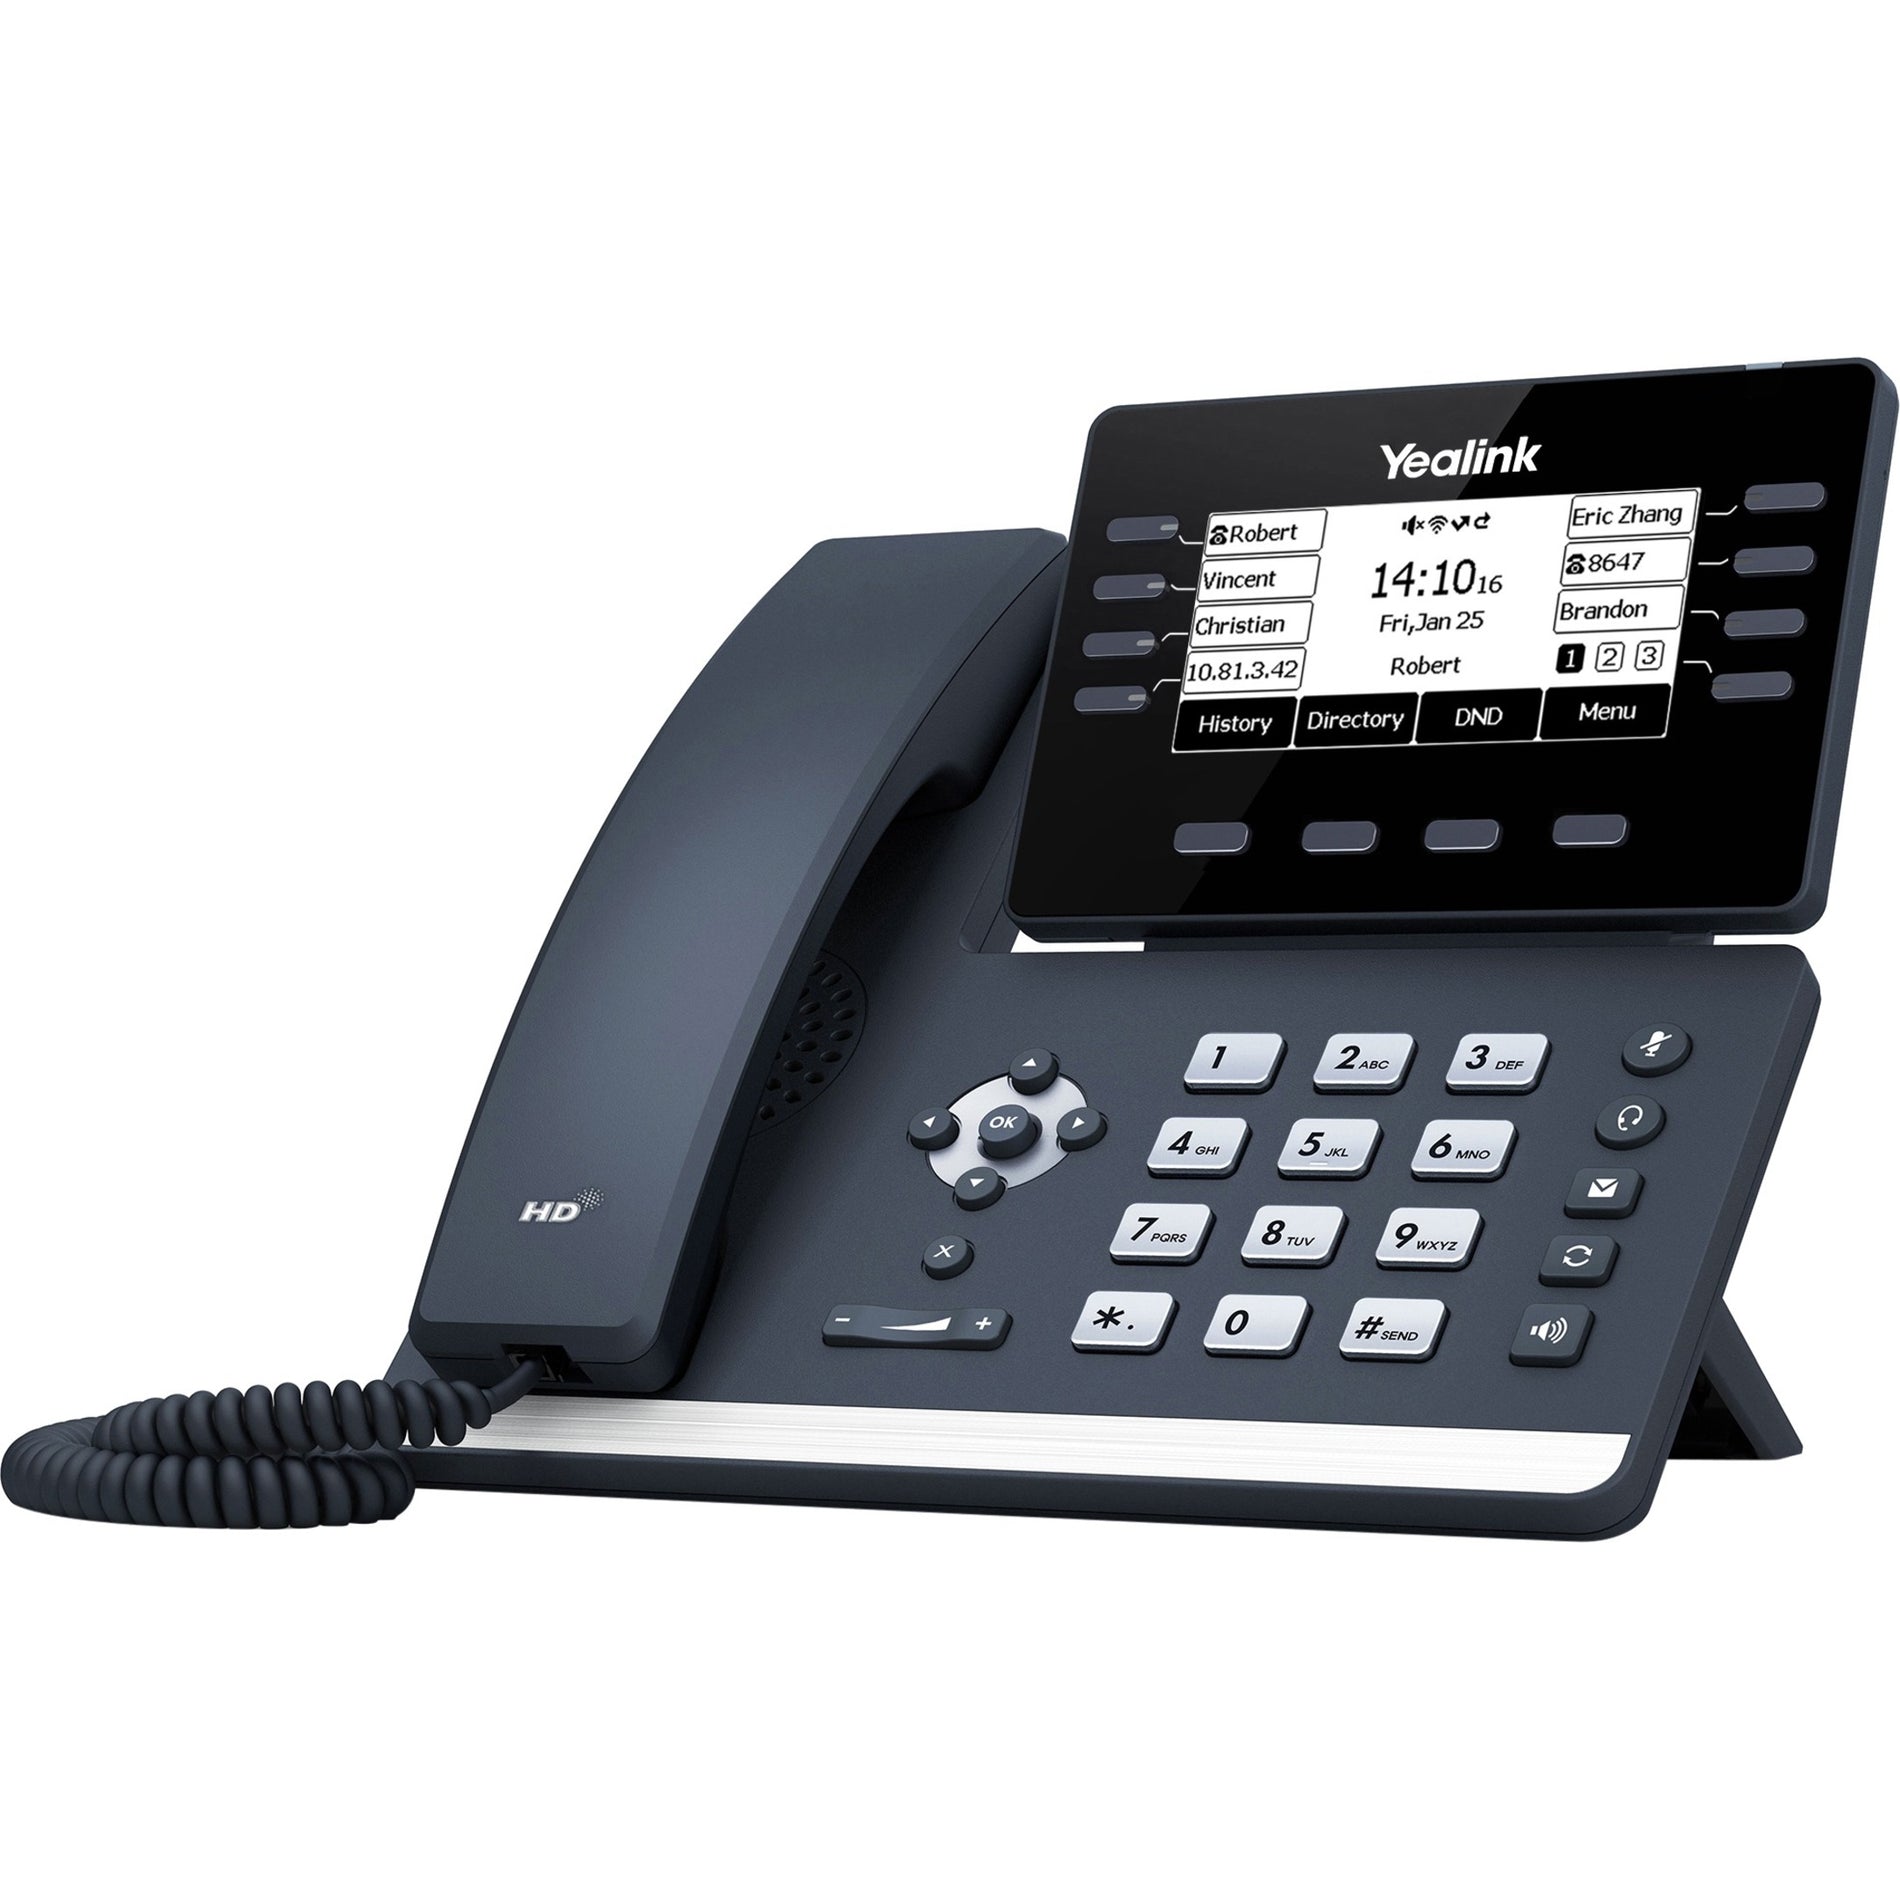 Yealink SIP-T53W Prime Business Phone with 3.7" Graphical LCD Screen, Built-In Bluetooth 4.2